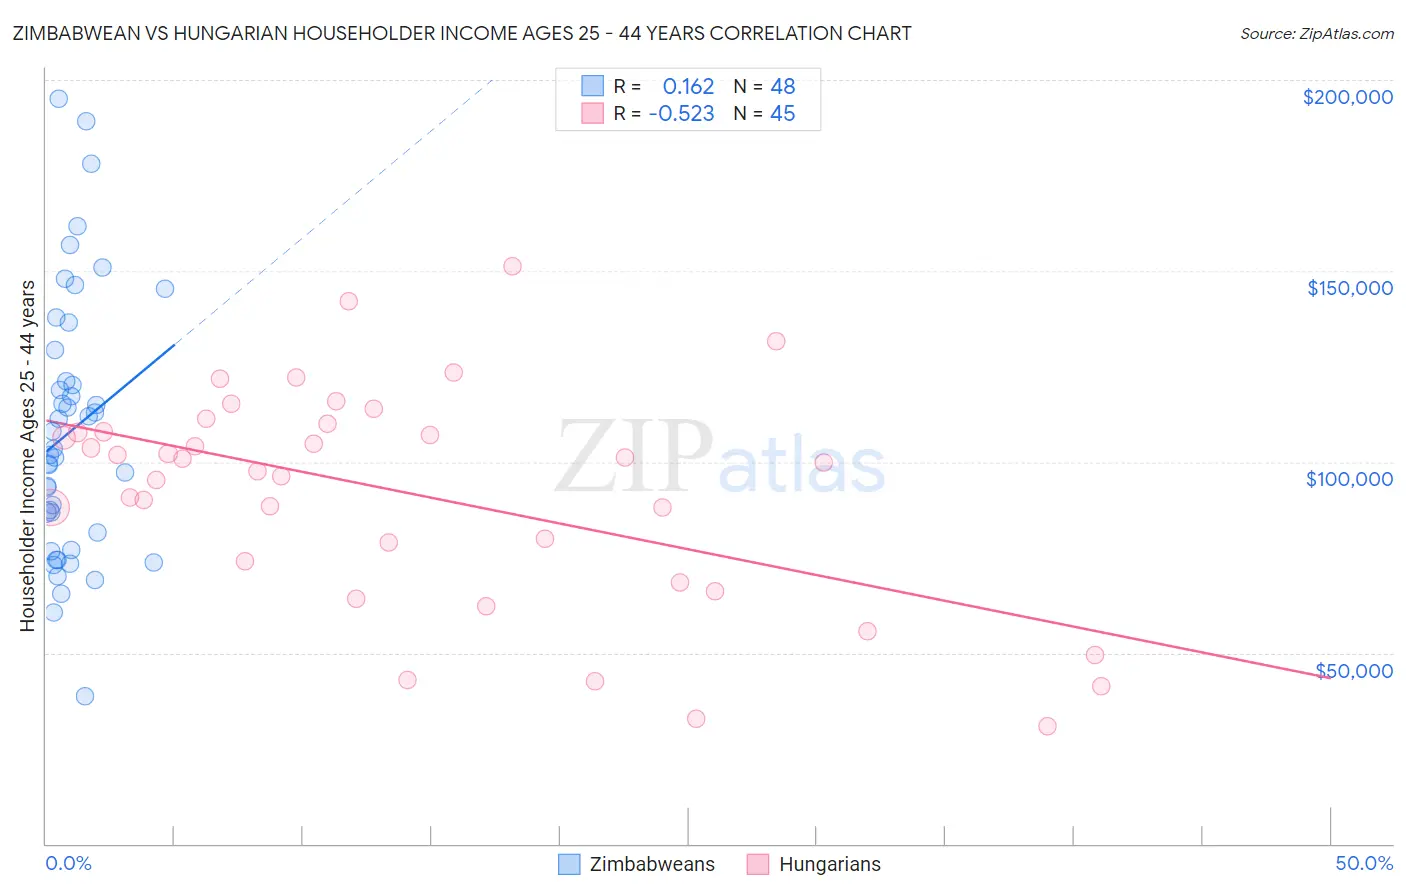 Zimbabwean vs Hungarian Householder Income Ages 25 - 44 years